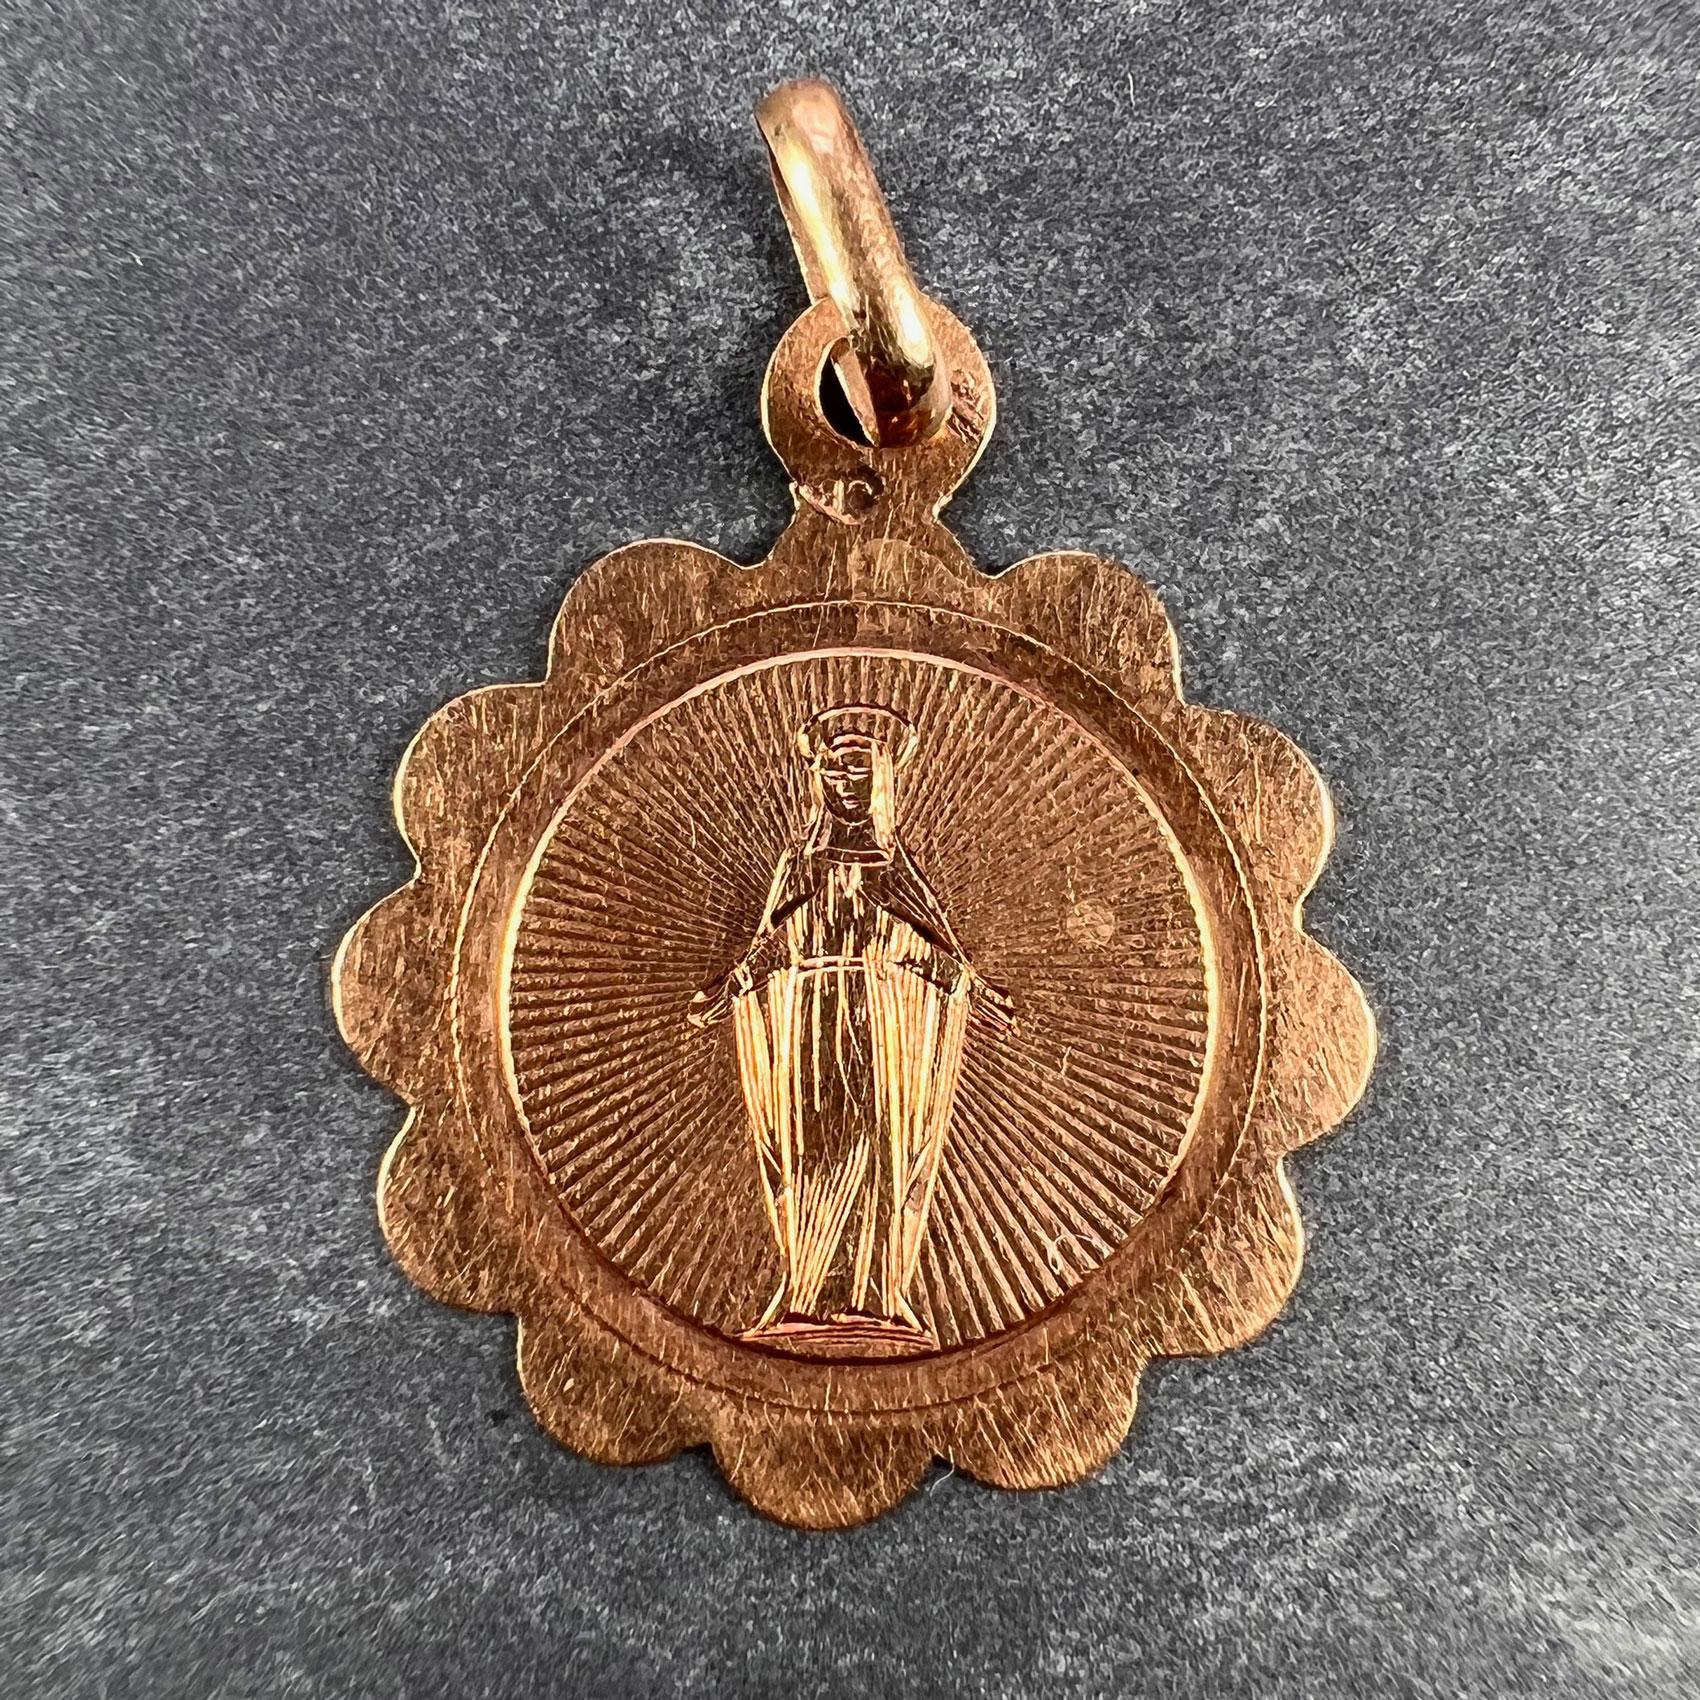 A French 18 karat (18K) rose gold charm pendant designed as a medal depicting the Virgin Mary. Stamped with the horse’s head mark for 18 karat gold and French manufacture between 1838 and 1919, with an unknown maker's mark.  

Dimensions: 2.2 x 1.8